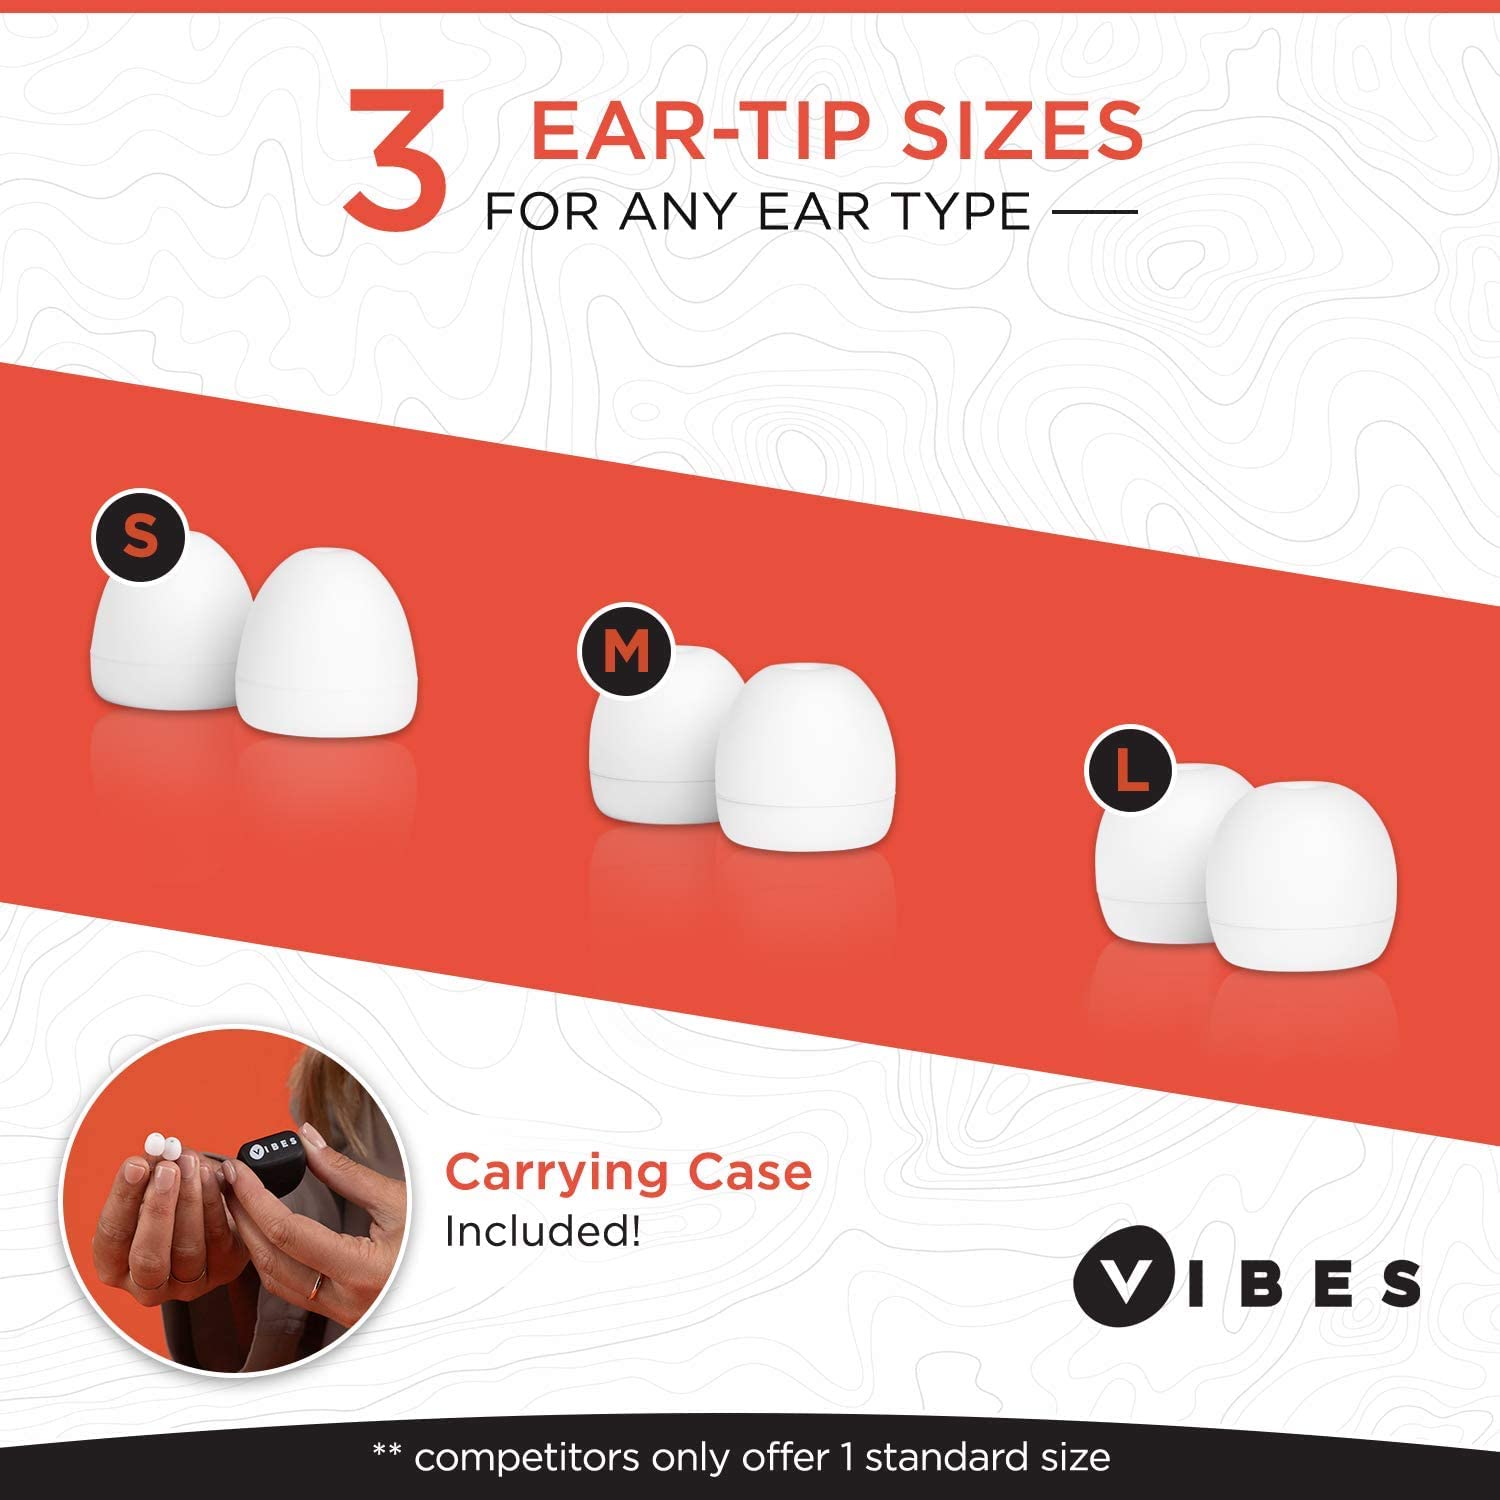 Vibes High-Fidelity Earplugs - Invisible Ear Plugs for Concerts, Musicians, Motorcycles, Airplanes, Raves, Work Noise Reduction, Hearing Protection - Fits Small Medium Large - As Seen On Shark Tank